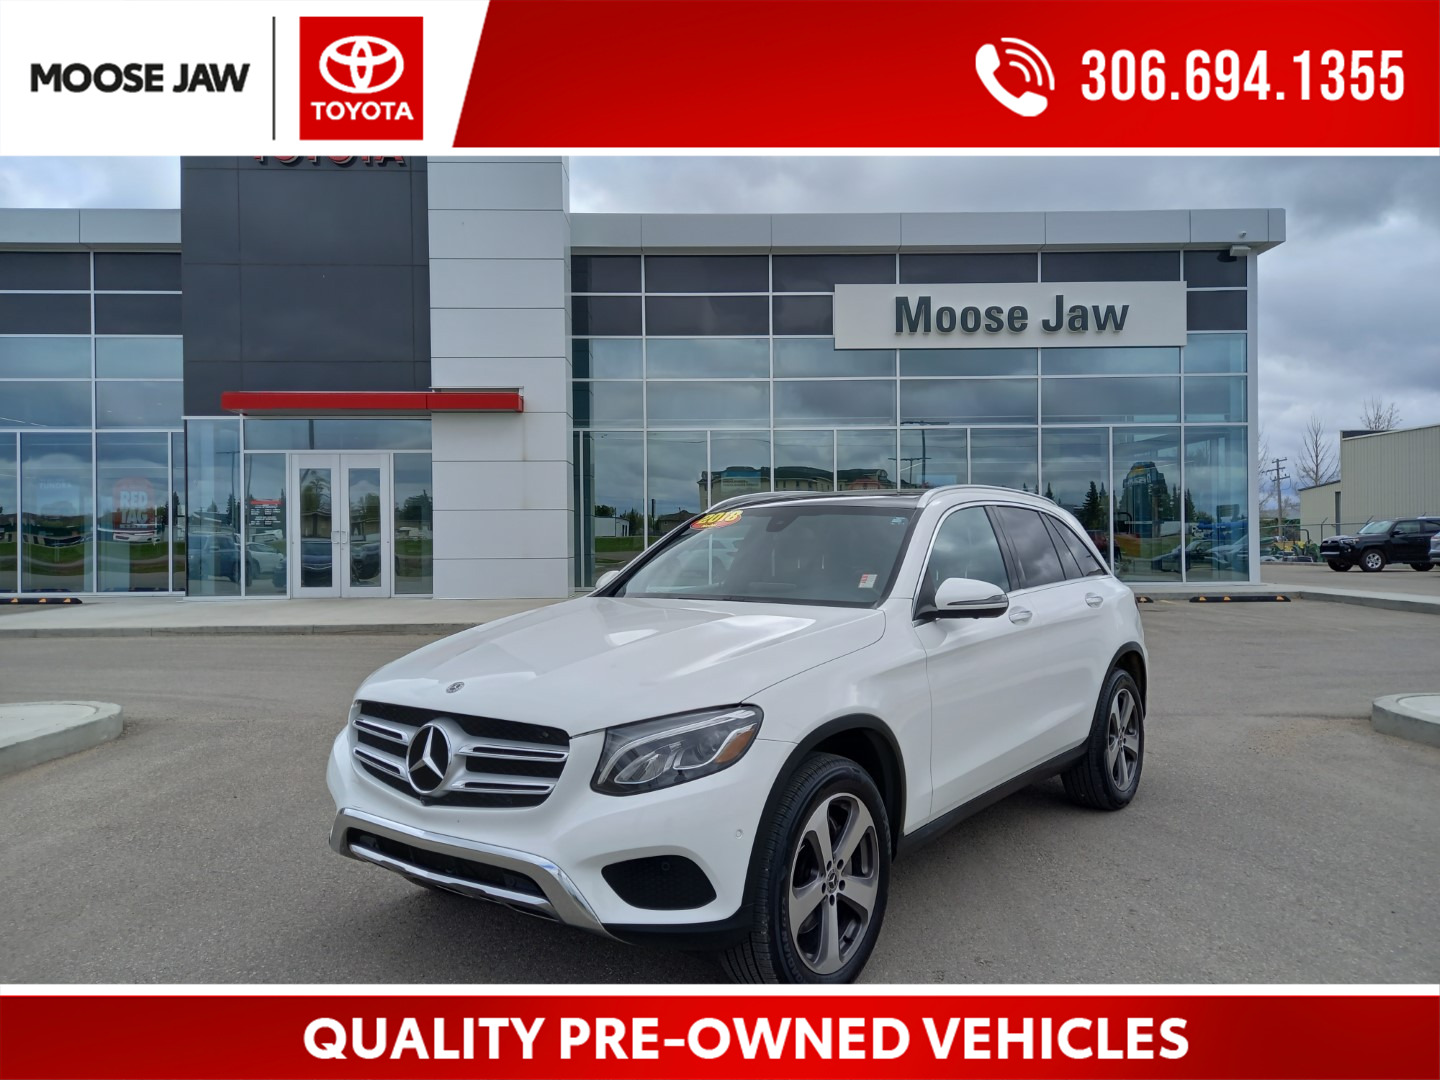 2018 Mercedes-Benz GLC300 LOCAL TRADE WITH ALL THE RIGHT EQUIPMENT INCLUDING